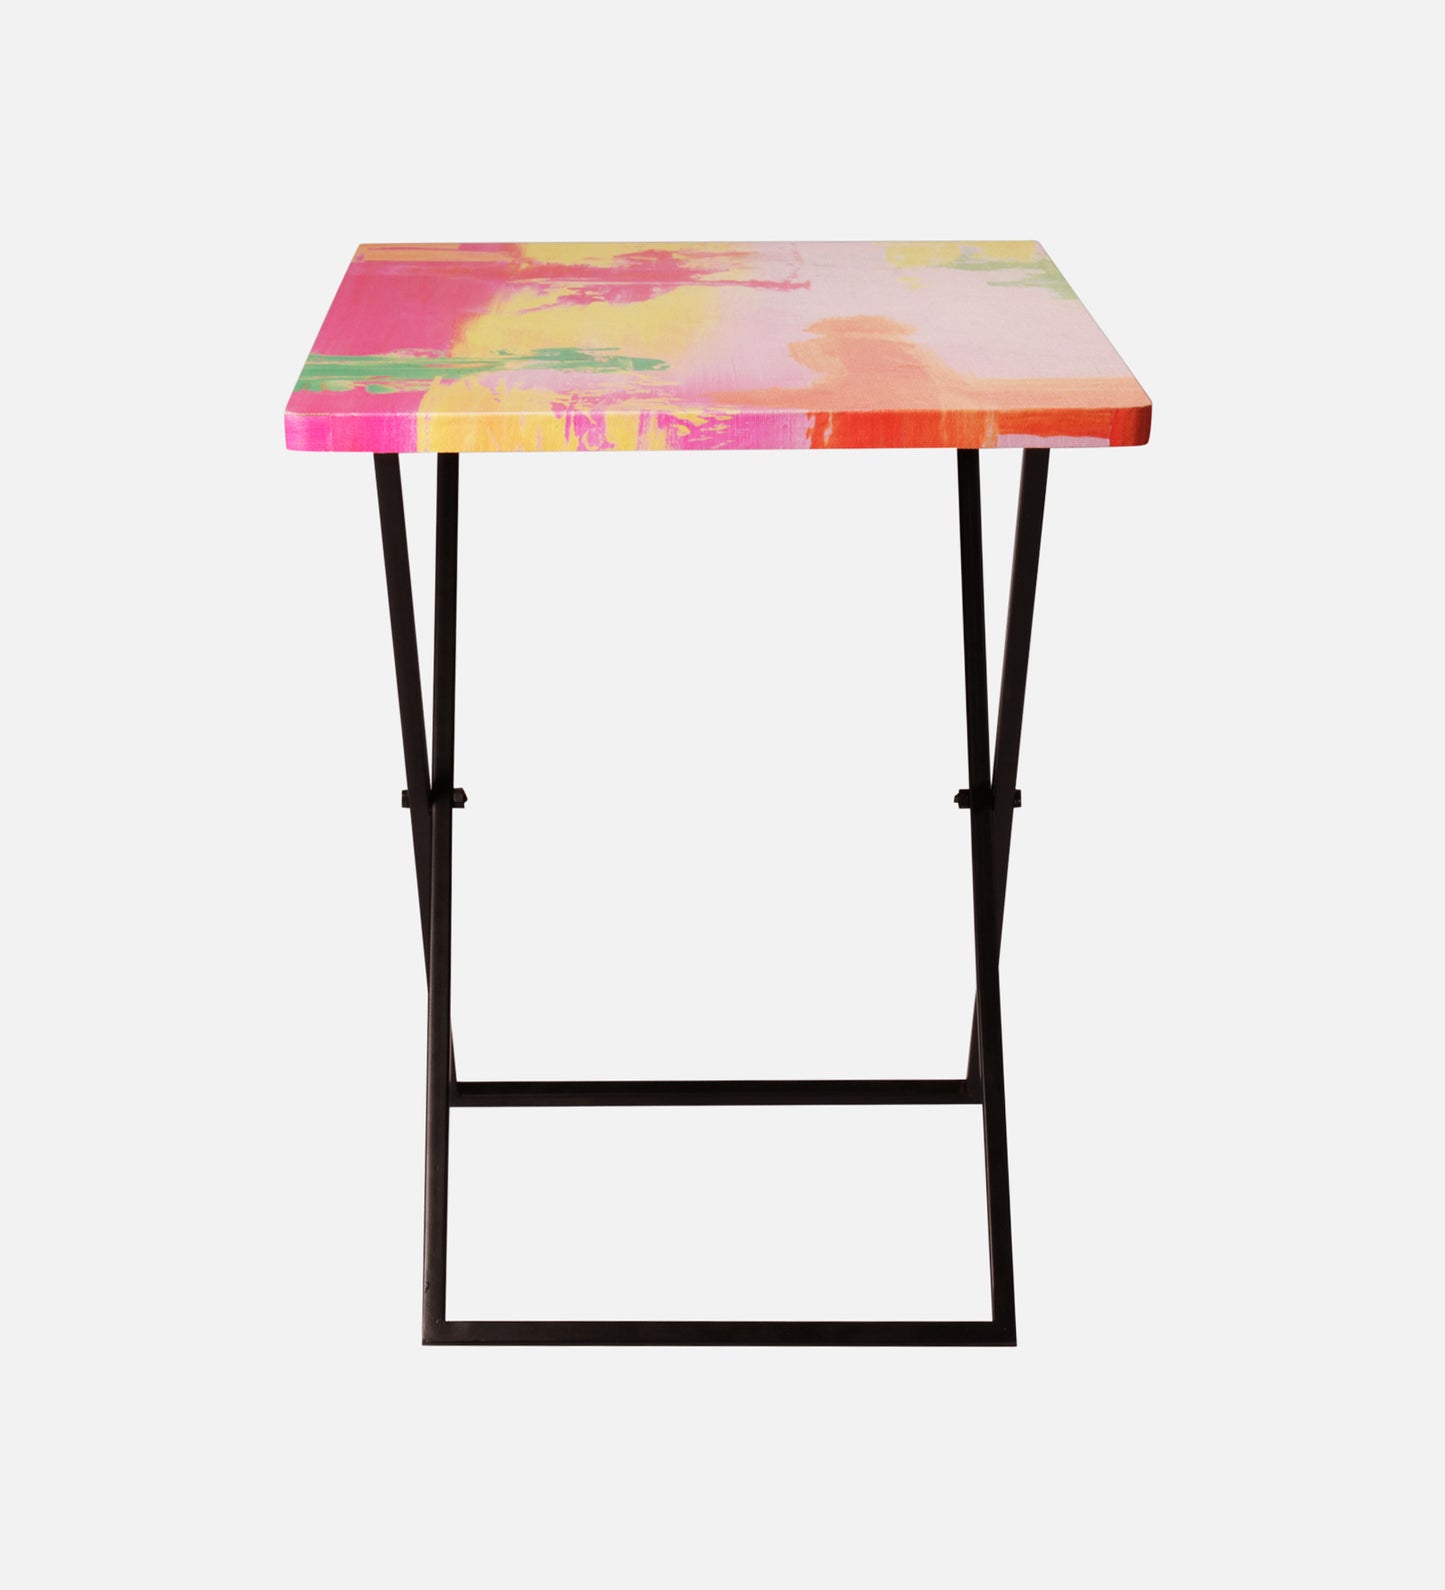 Neon Criss Cross Side Tables, Writing Tables, Wooden Tables, Kids Tables, End Tables Living Room Decor by A Tiny Mistake